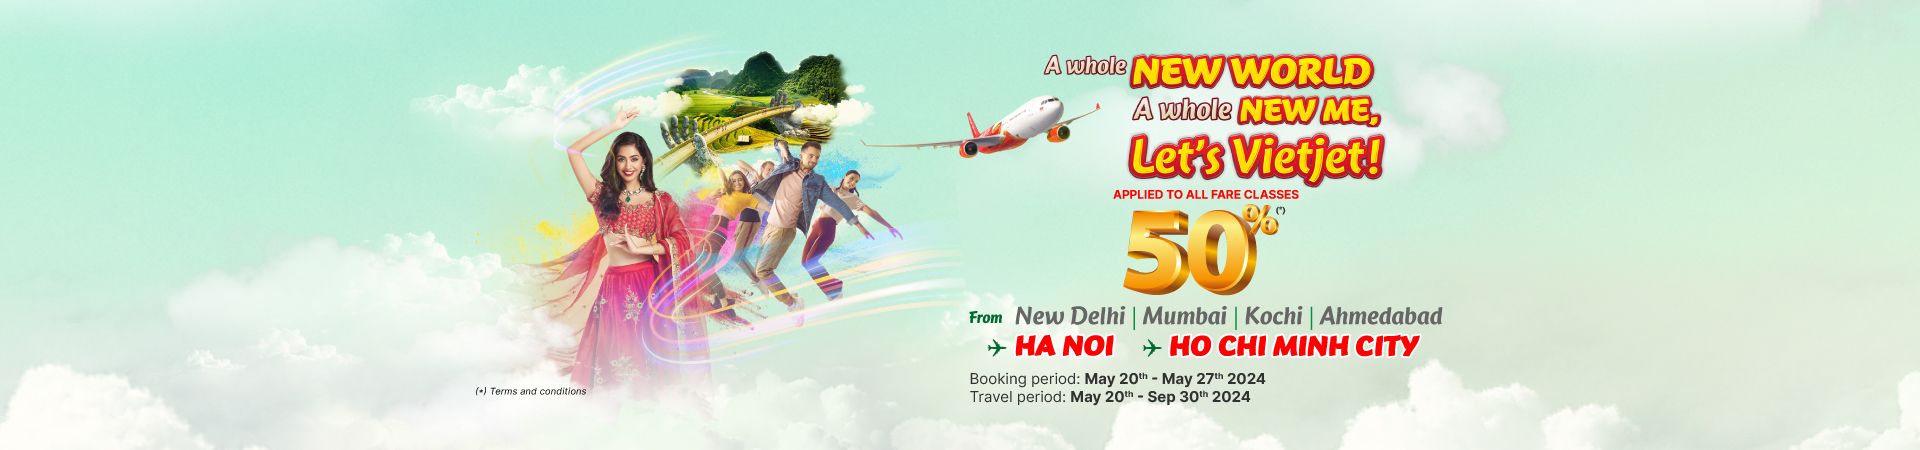 A WHOLE NEW WORLD - A WHOLE NEW ME. LET'S VIETJET! DISCOUNT 50% ON ALL FARE CLASSES.